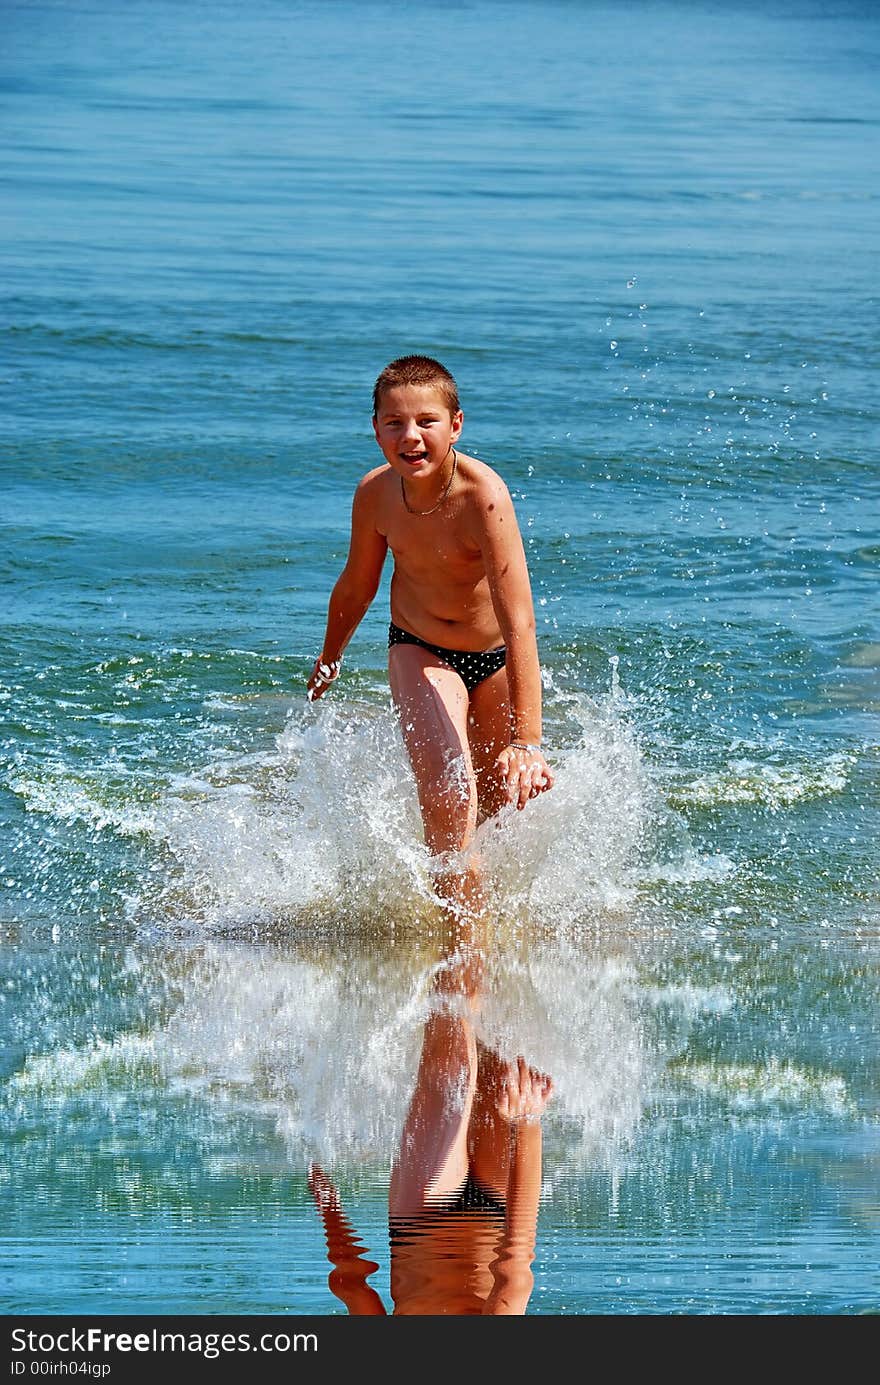 A boy running out of water with a splash. A boy running out of water with a splash